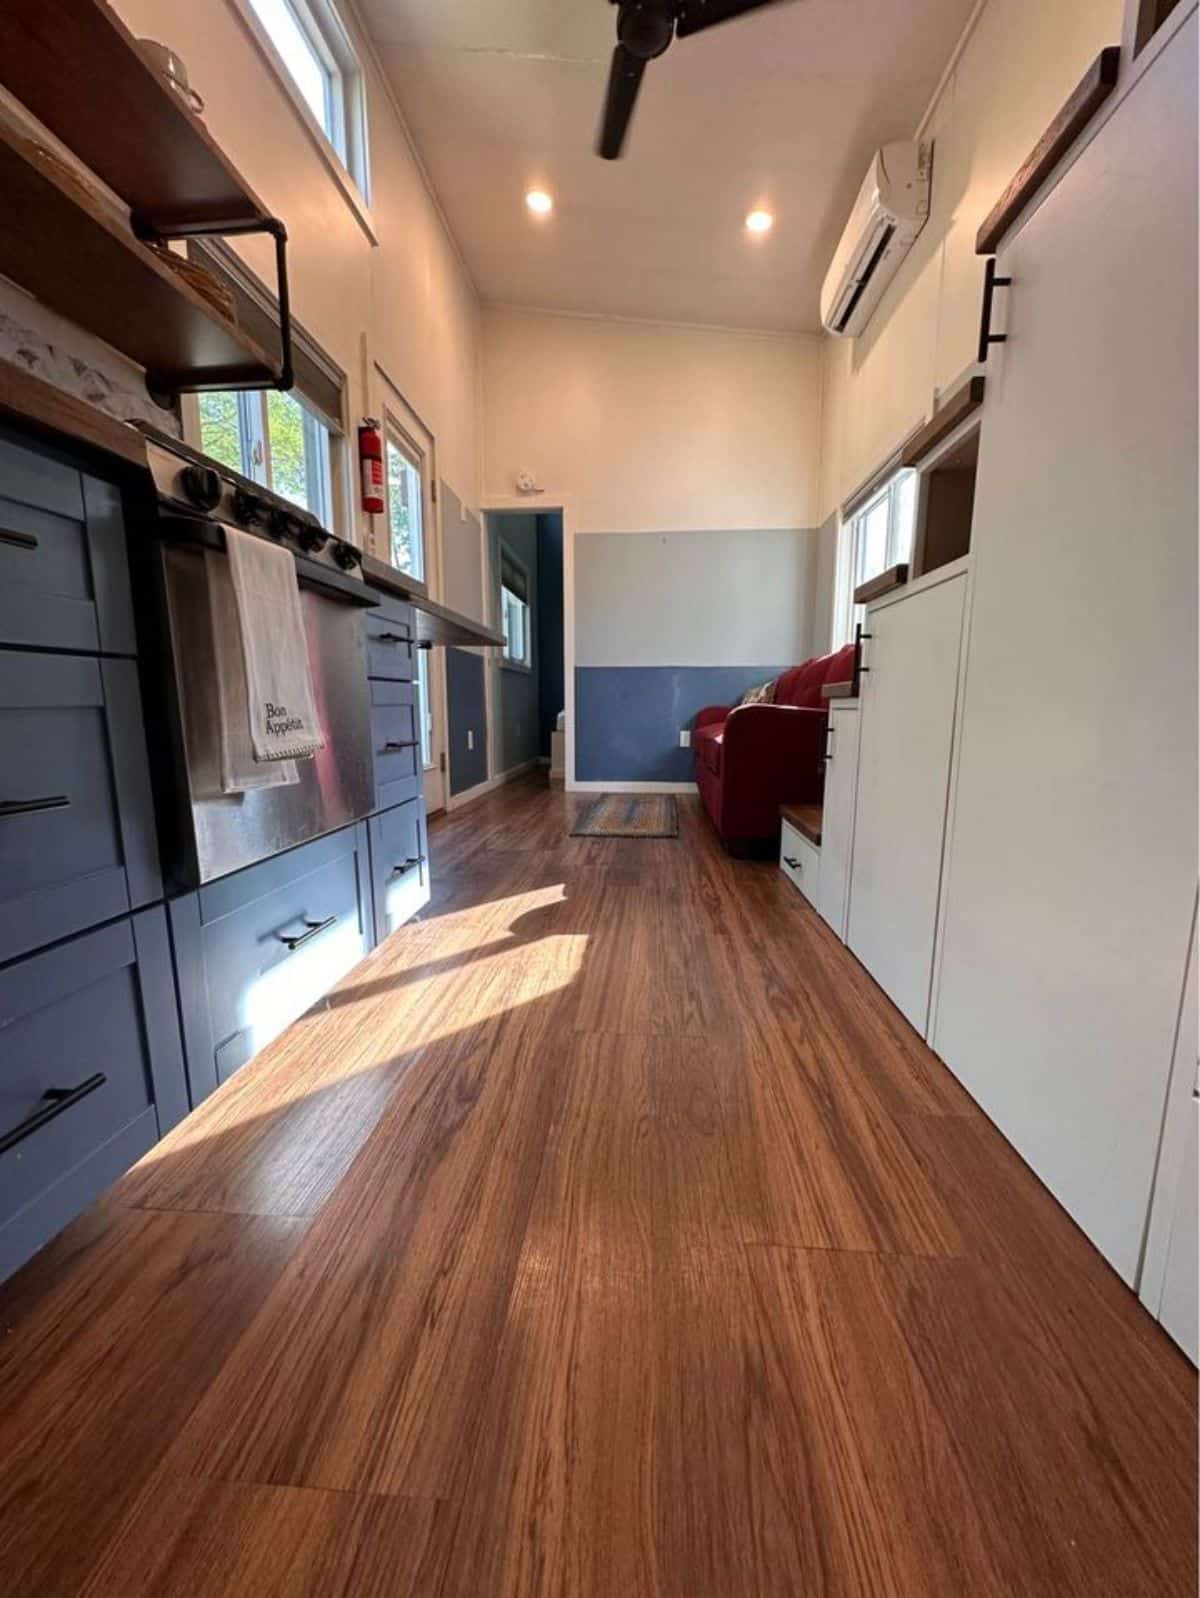 storage cabinets in the kitchen area of 32' tiny home for four